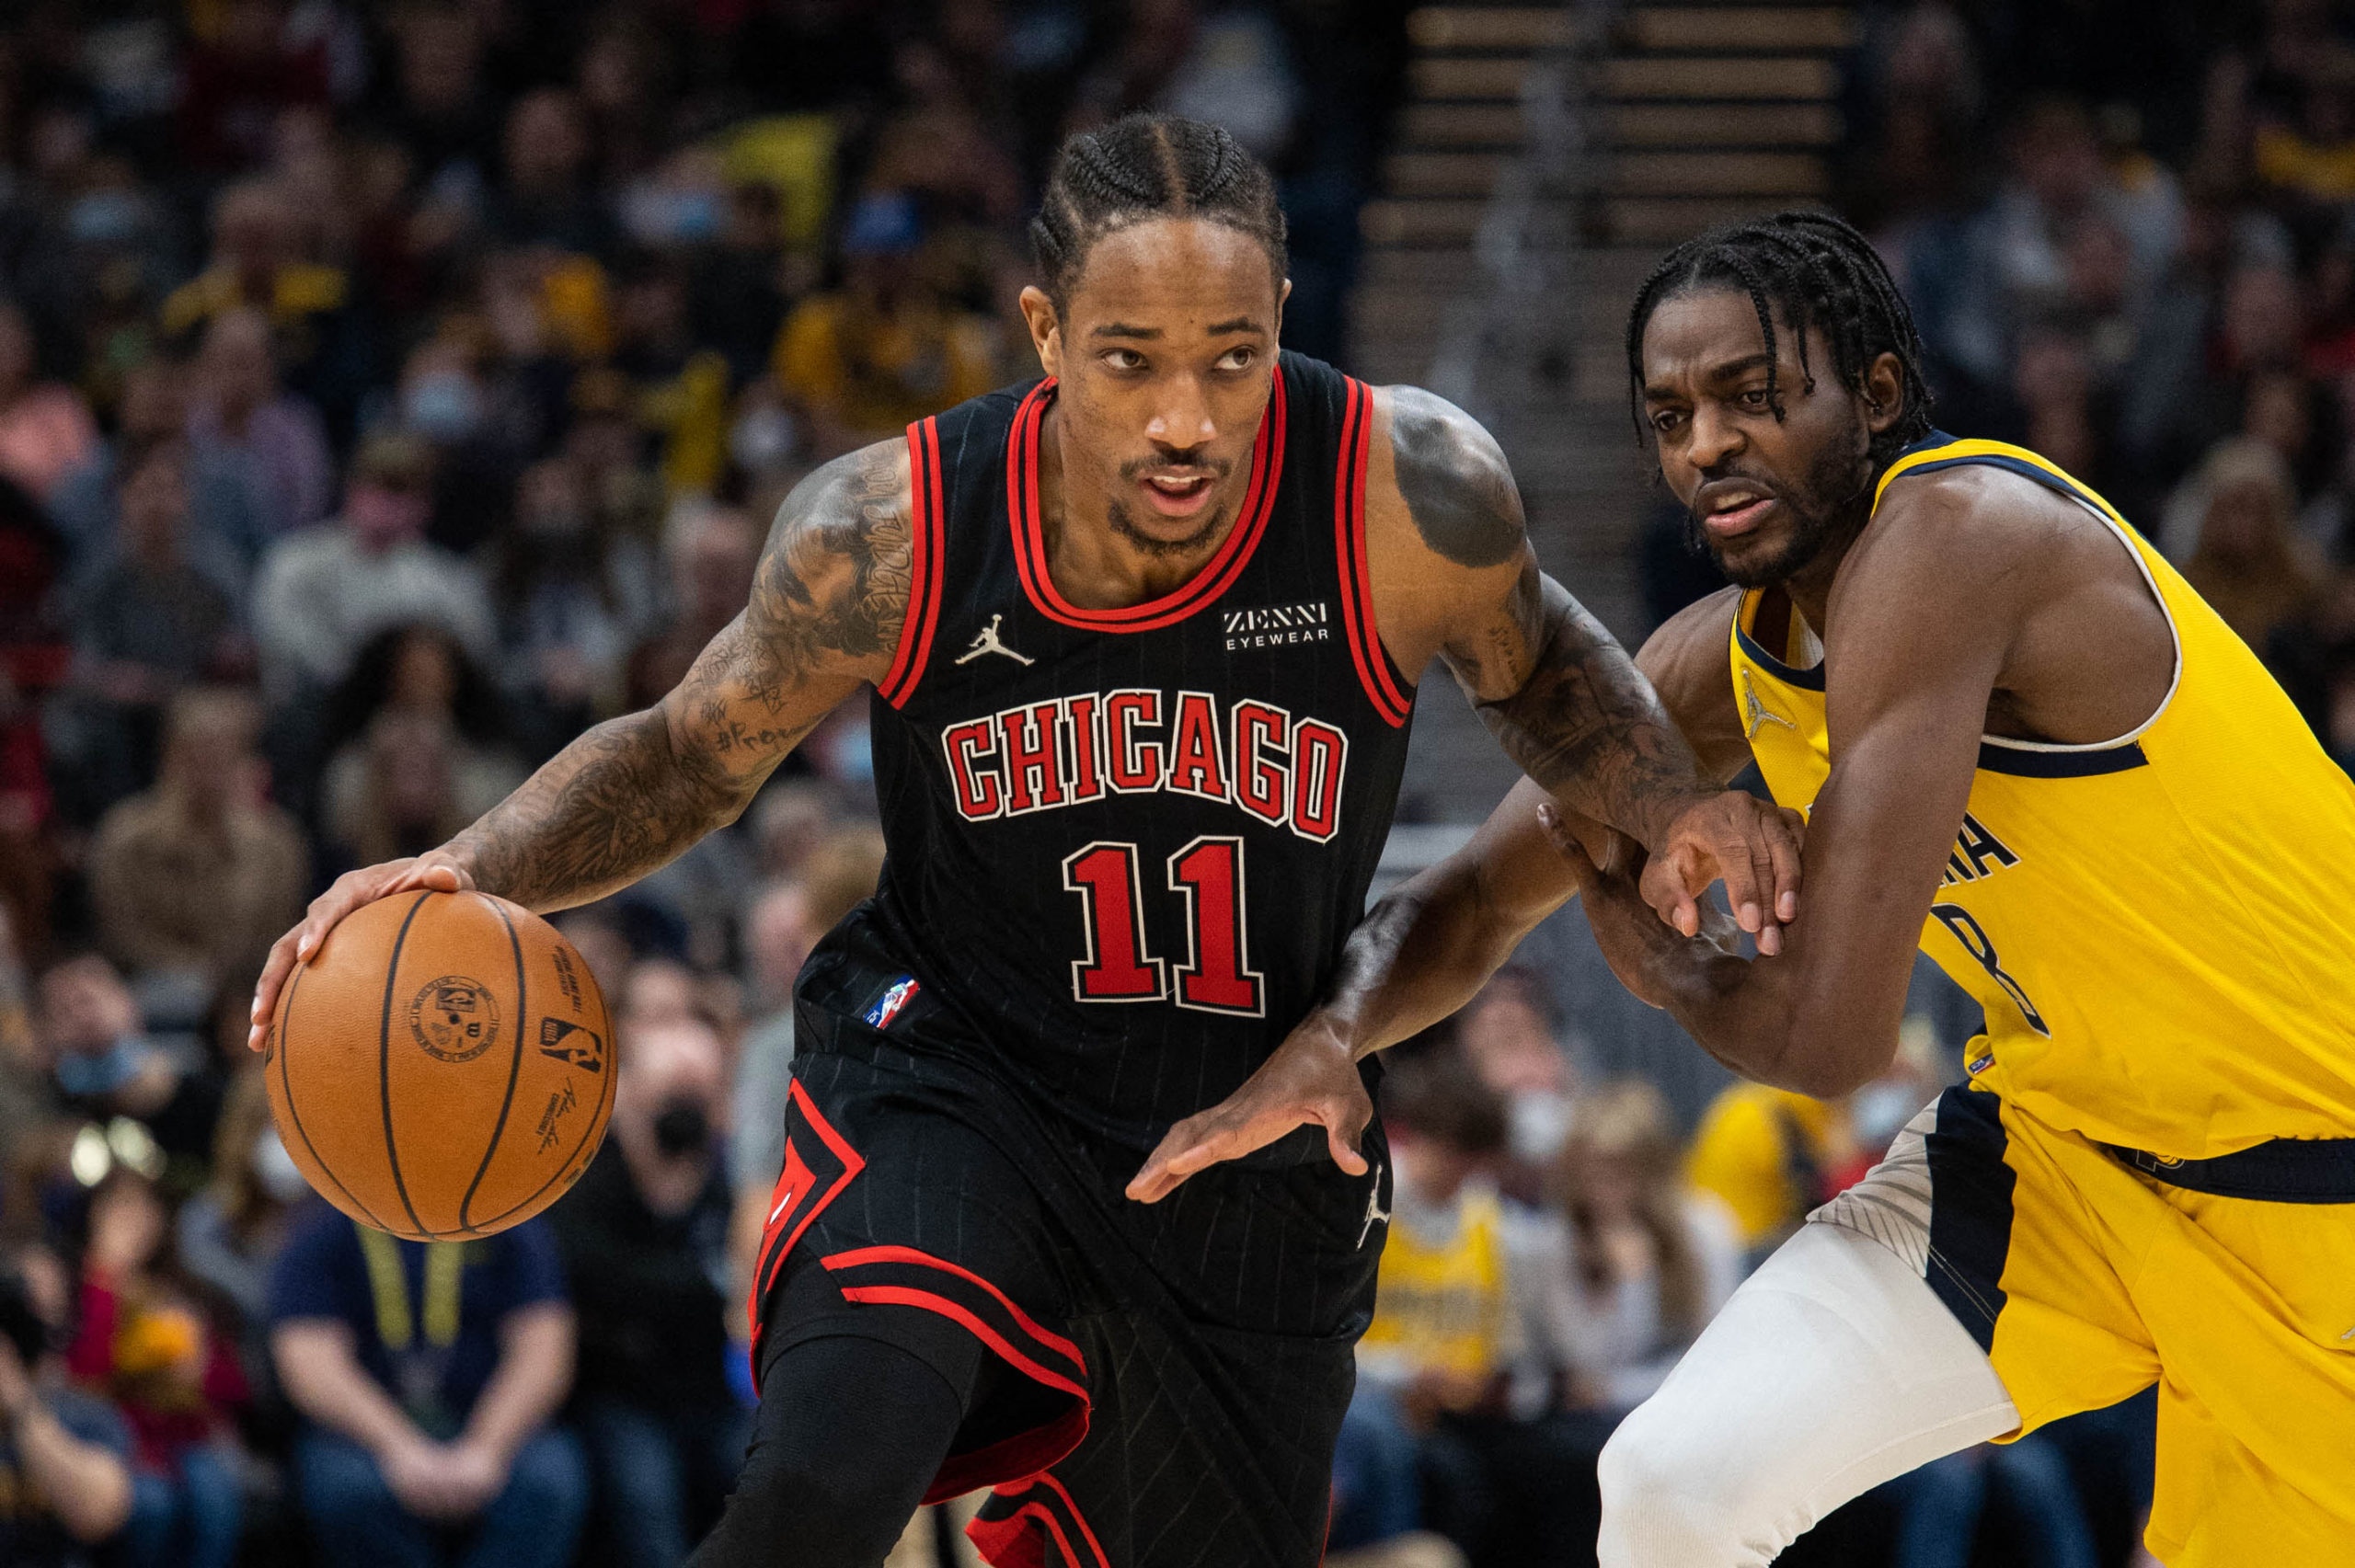 Chicago Bulls forward DeMar DeRozan (11) dribbles the ball while Indiana Pacers forward Justin Holiday (8) defends in the second half at Gainbridge Fieldhouse.